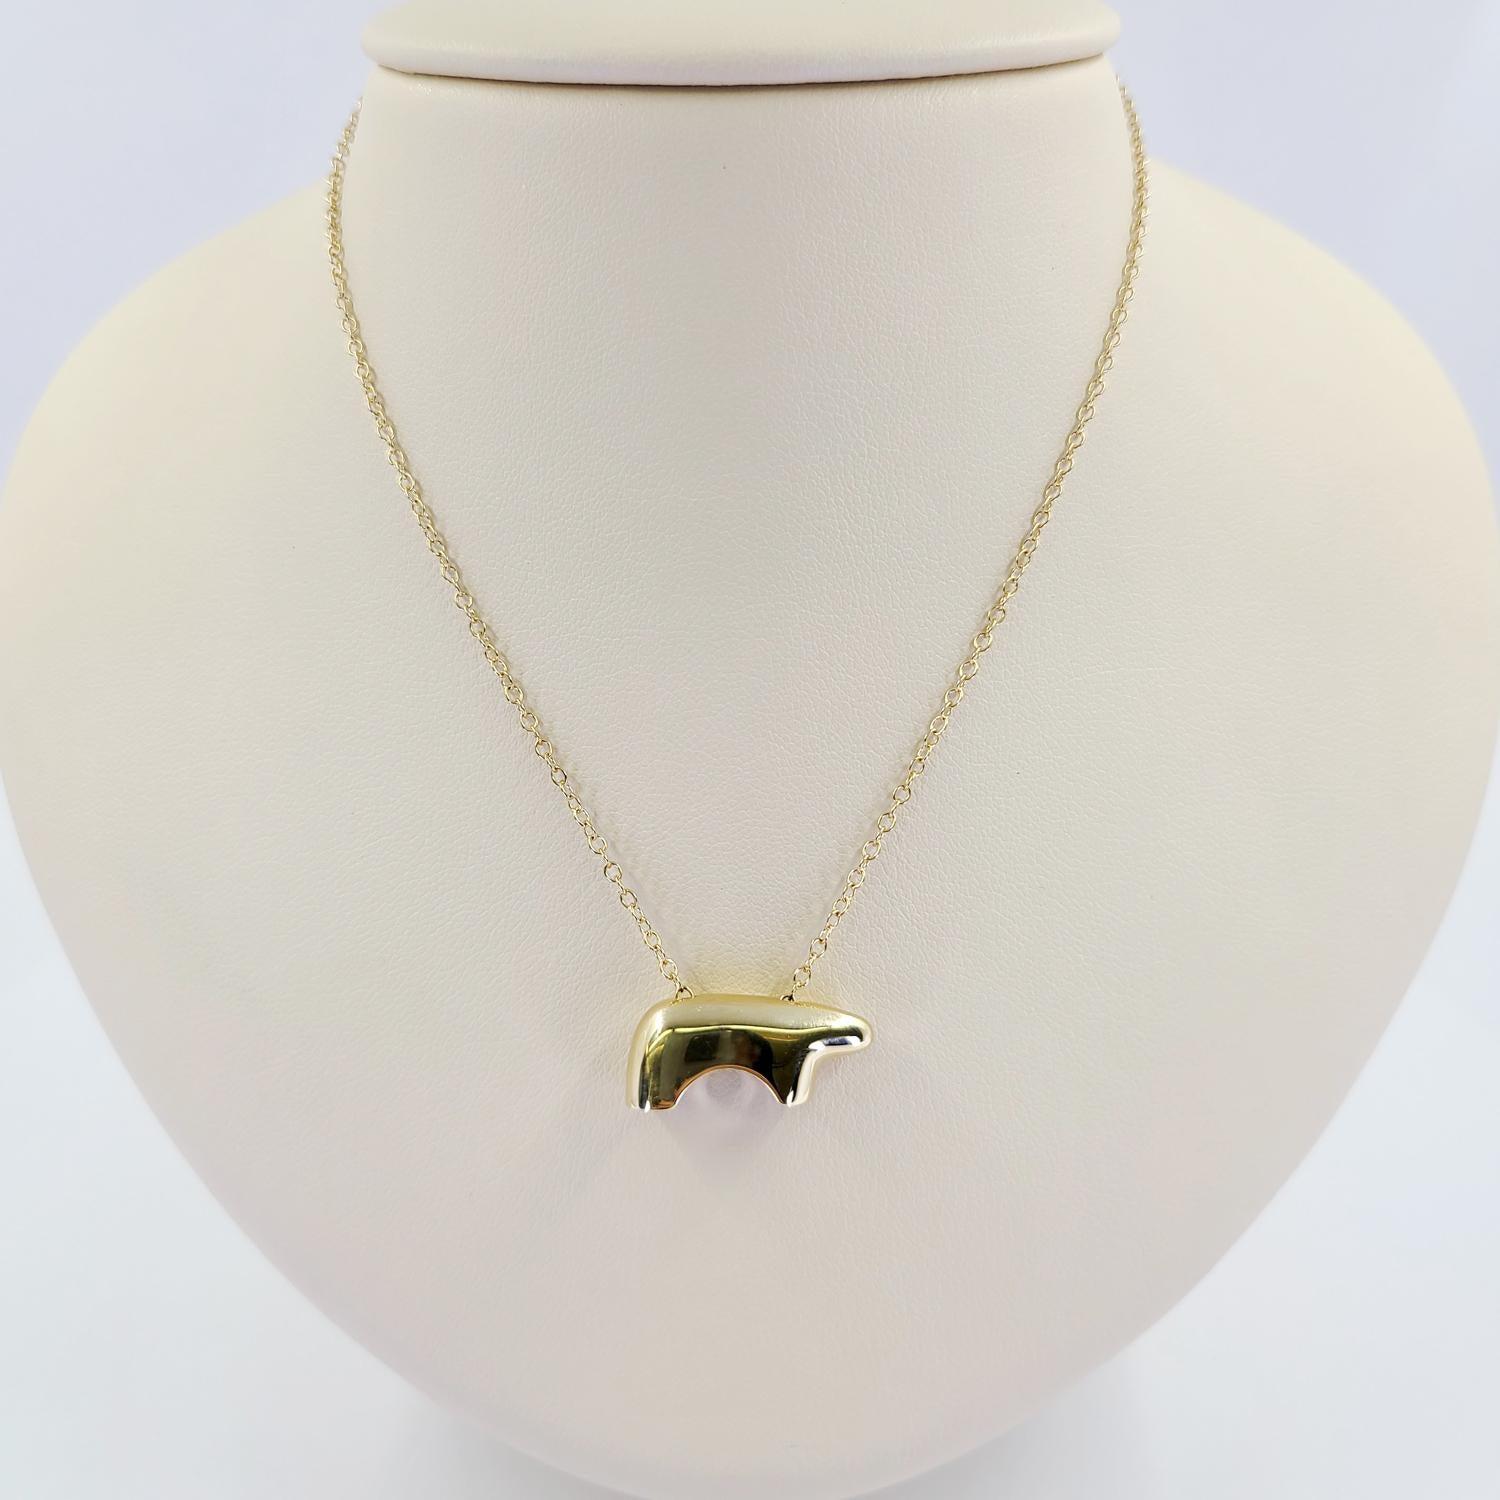 Pre-Owned 14 Karat Yellow Gold Original Golden Bear Necklace, Known As The Symbol Of Vail Valley. The Bear Pendant Measures 7/8